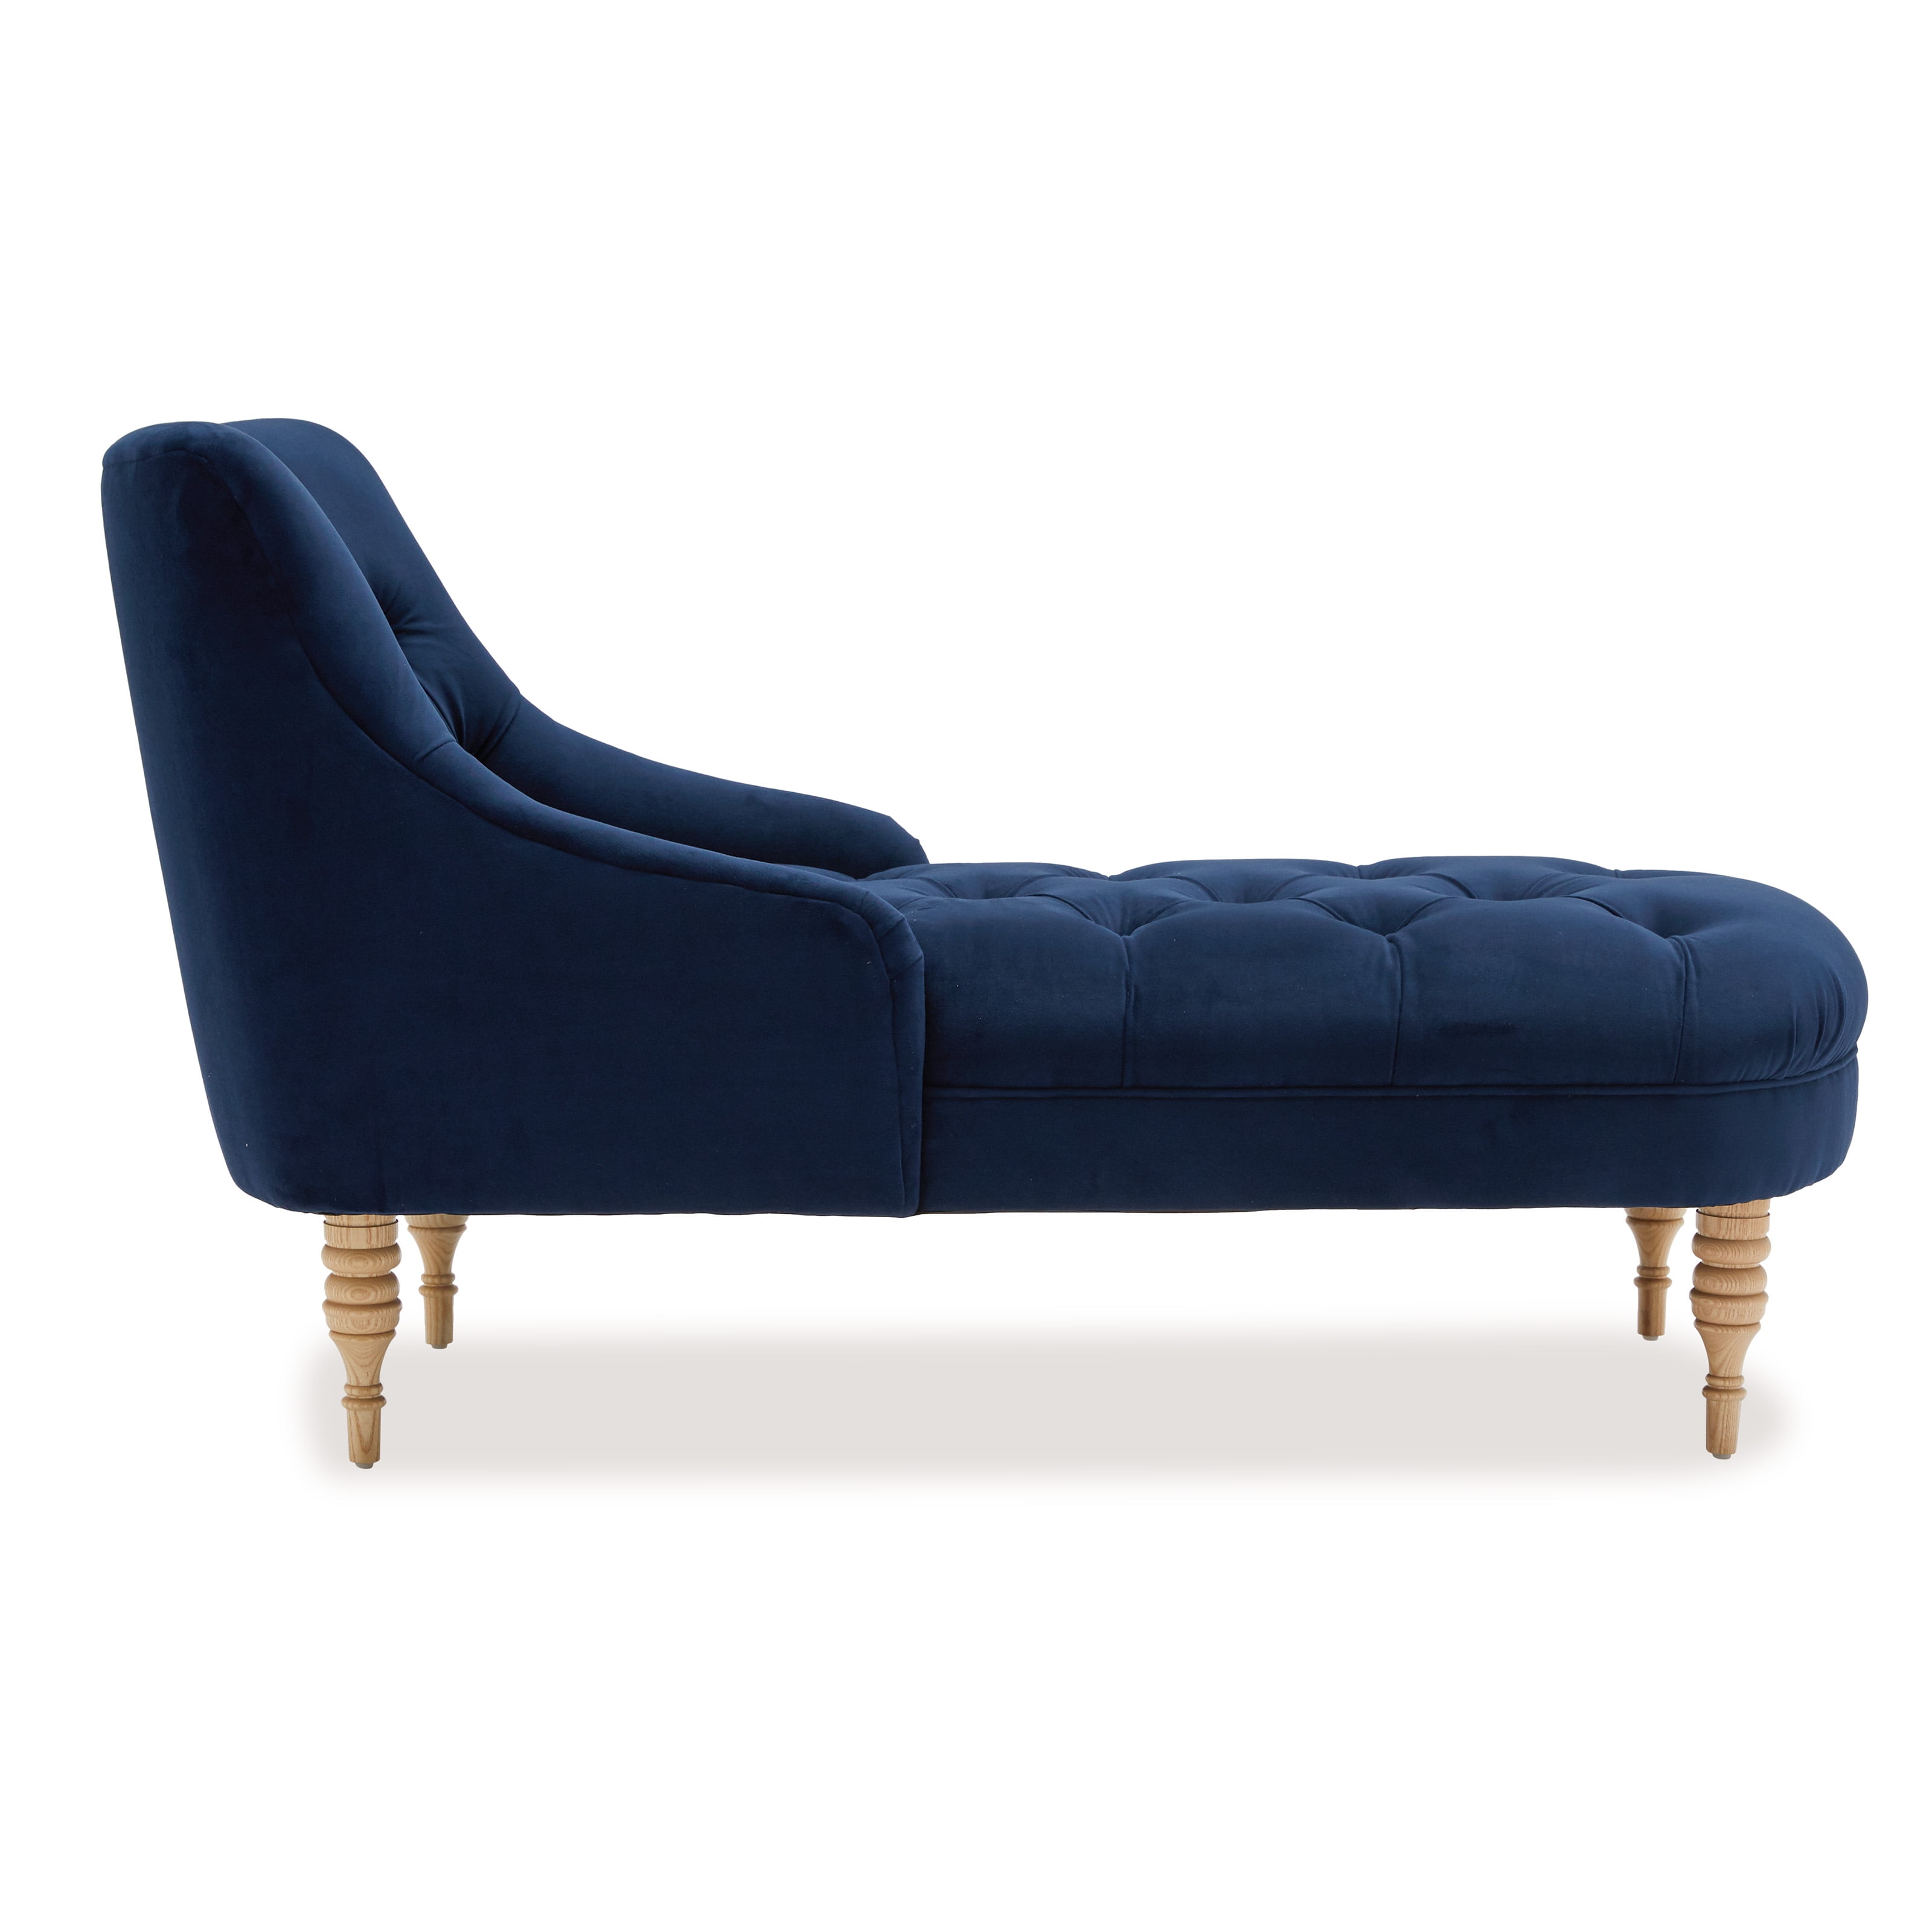 Hug Chaise Longue and Footstool – JoverValls